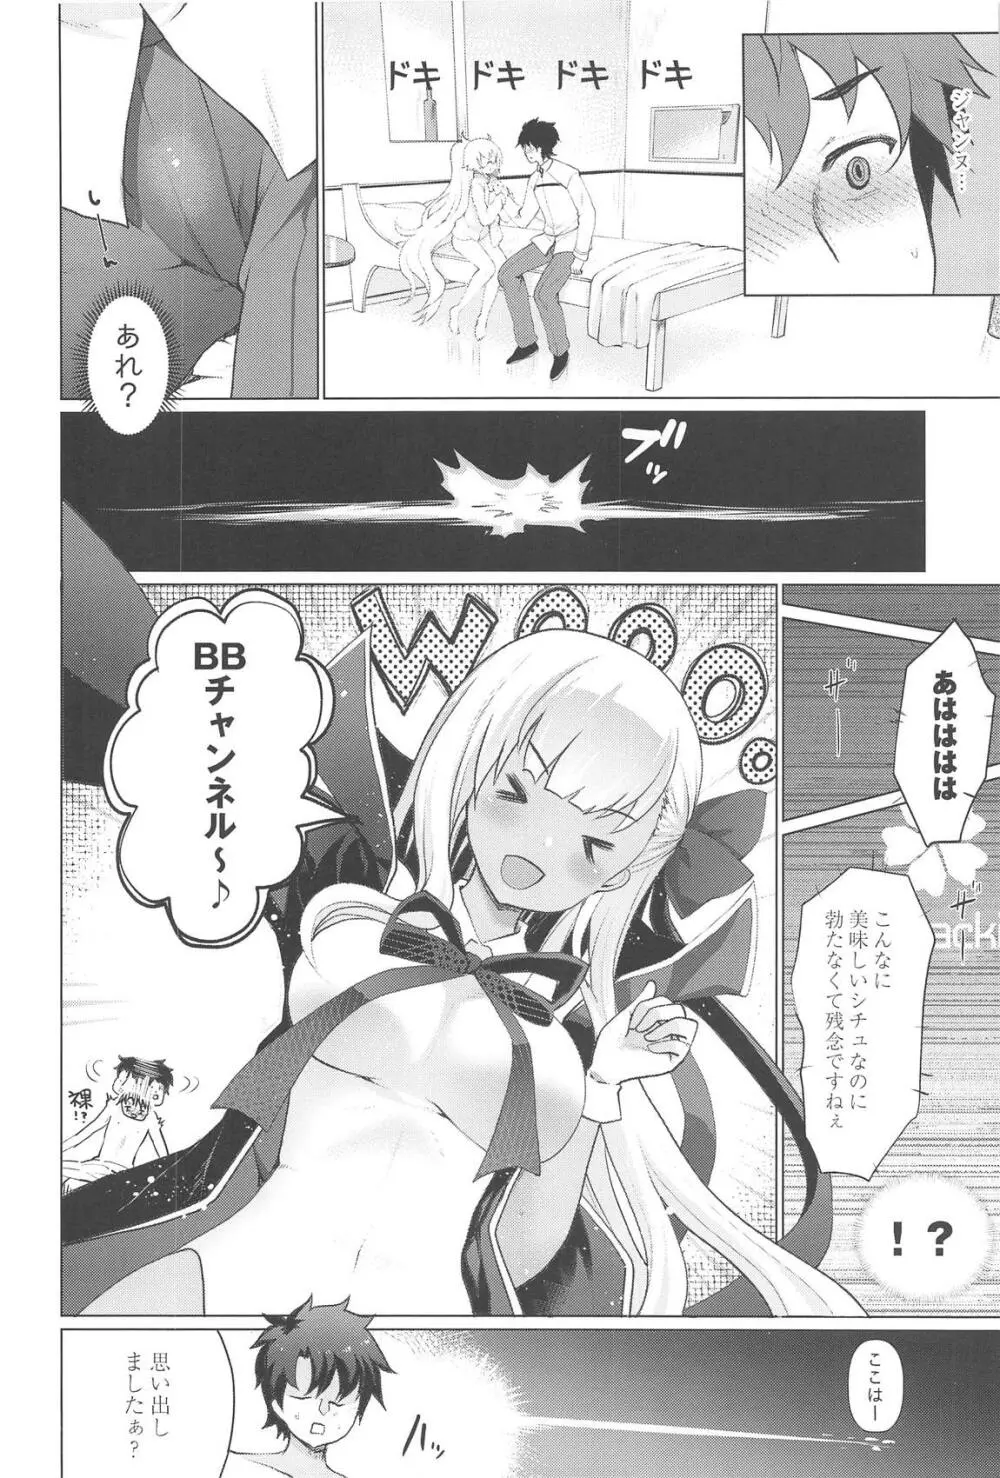 BBジェラシー Page.5